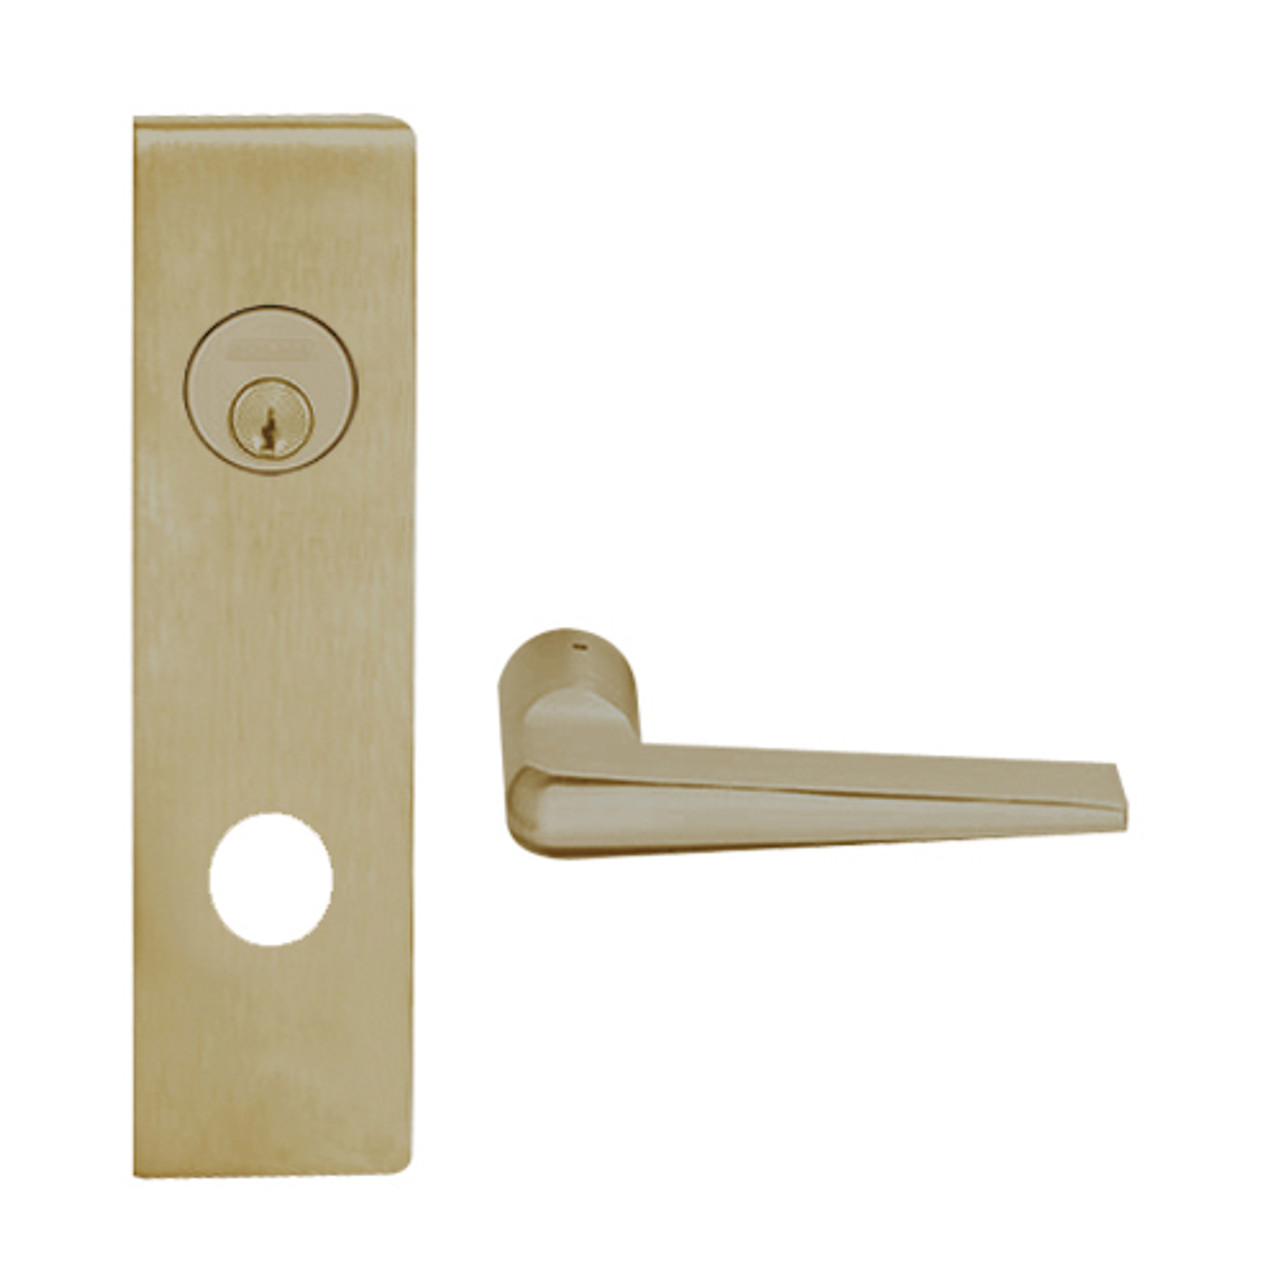 L9050P-05N-613 Schlage L Series Entrance Commercial Mortise Lock with 05 Cast Lever Design in Oil Rubbed Bronze